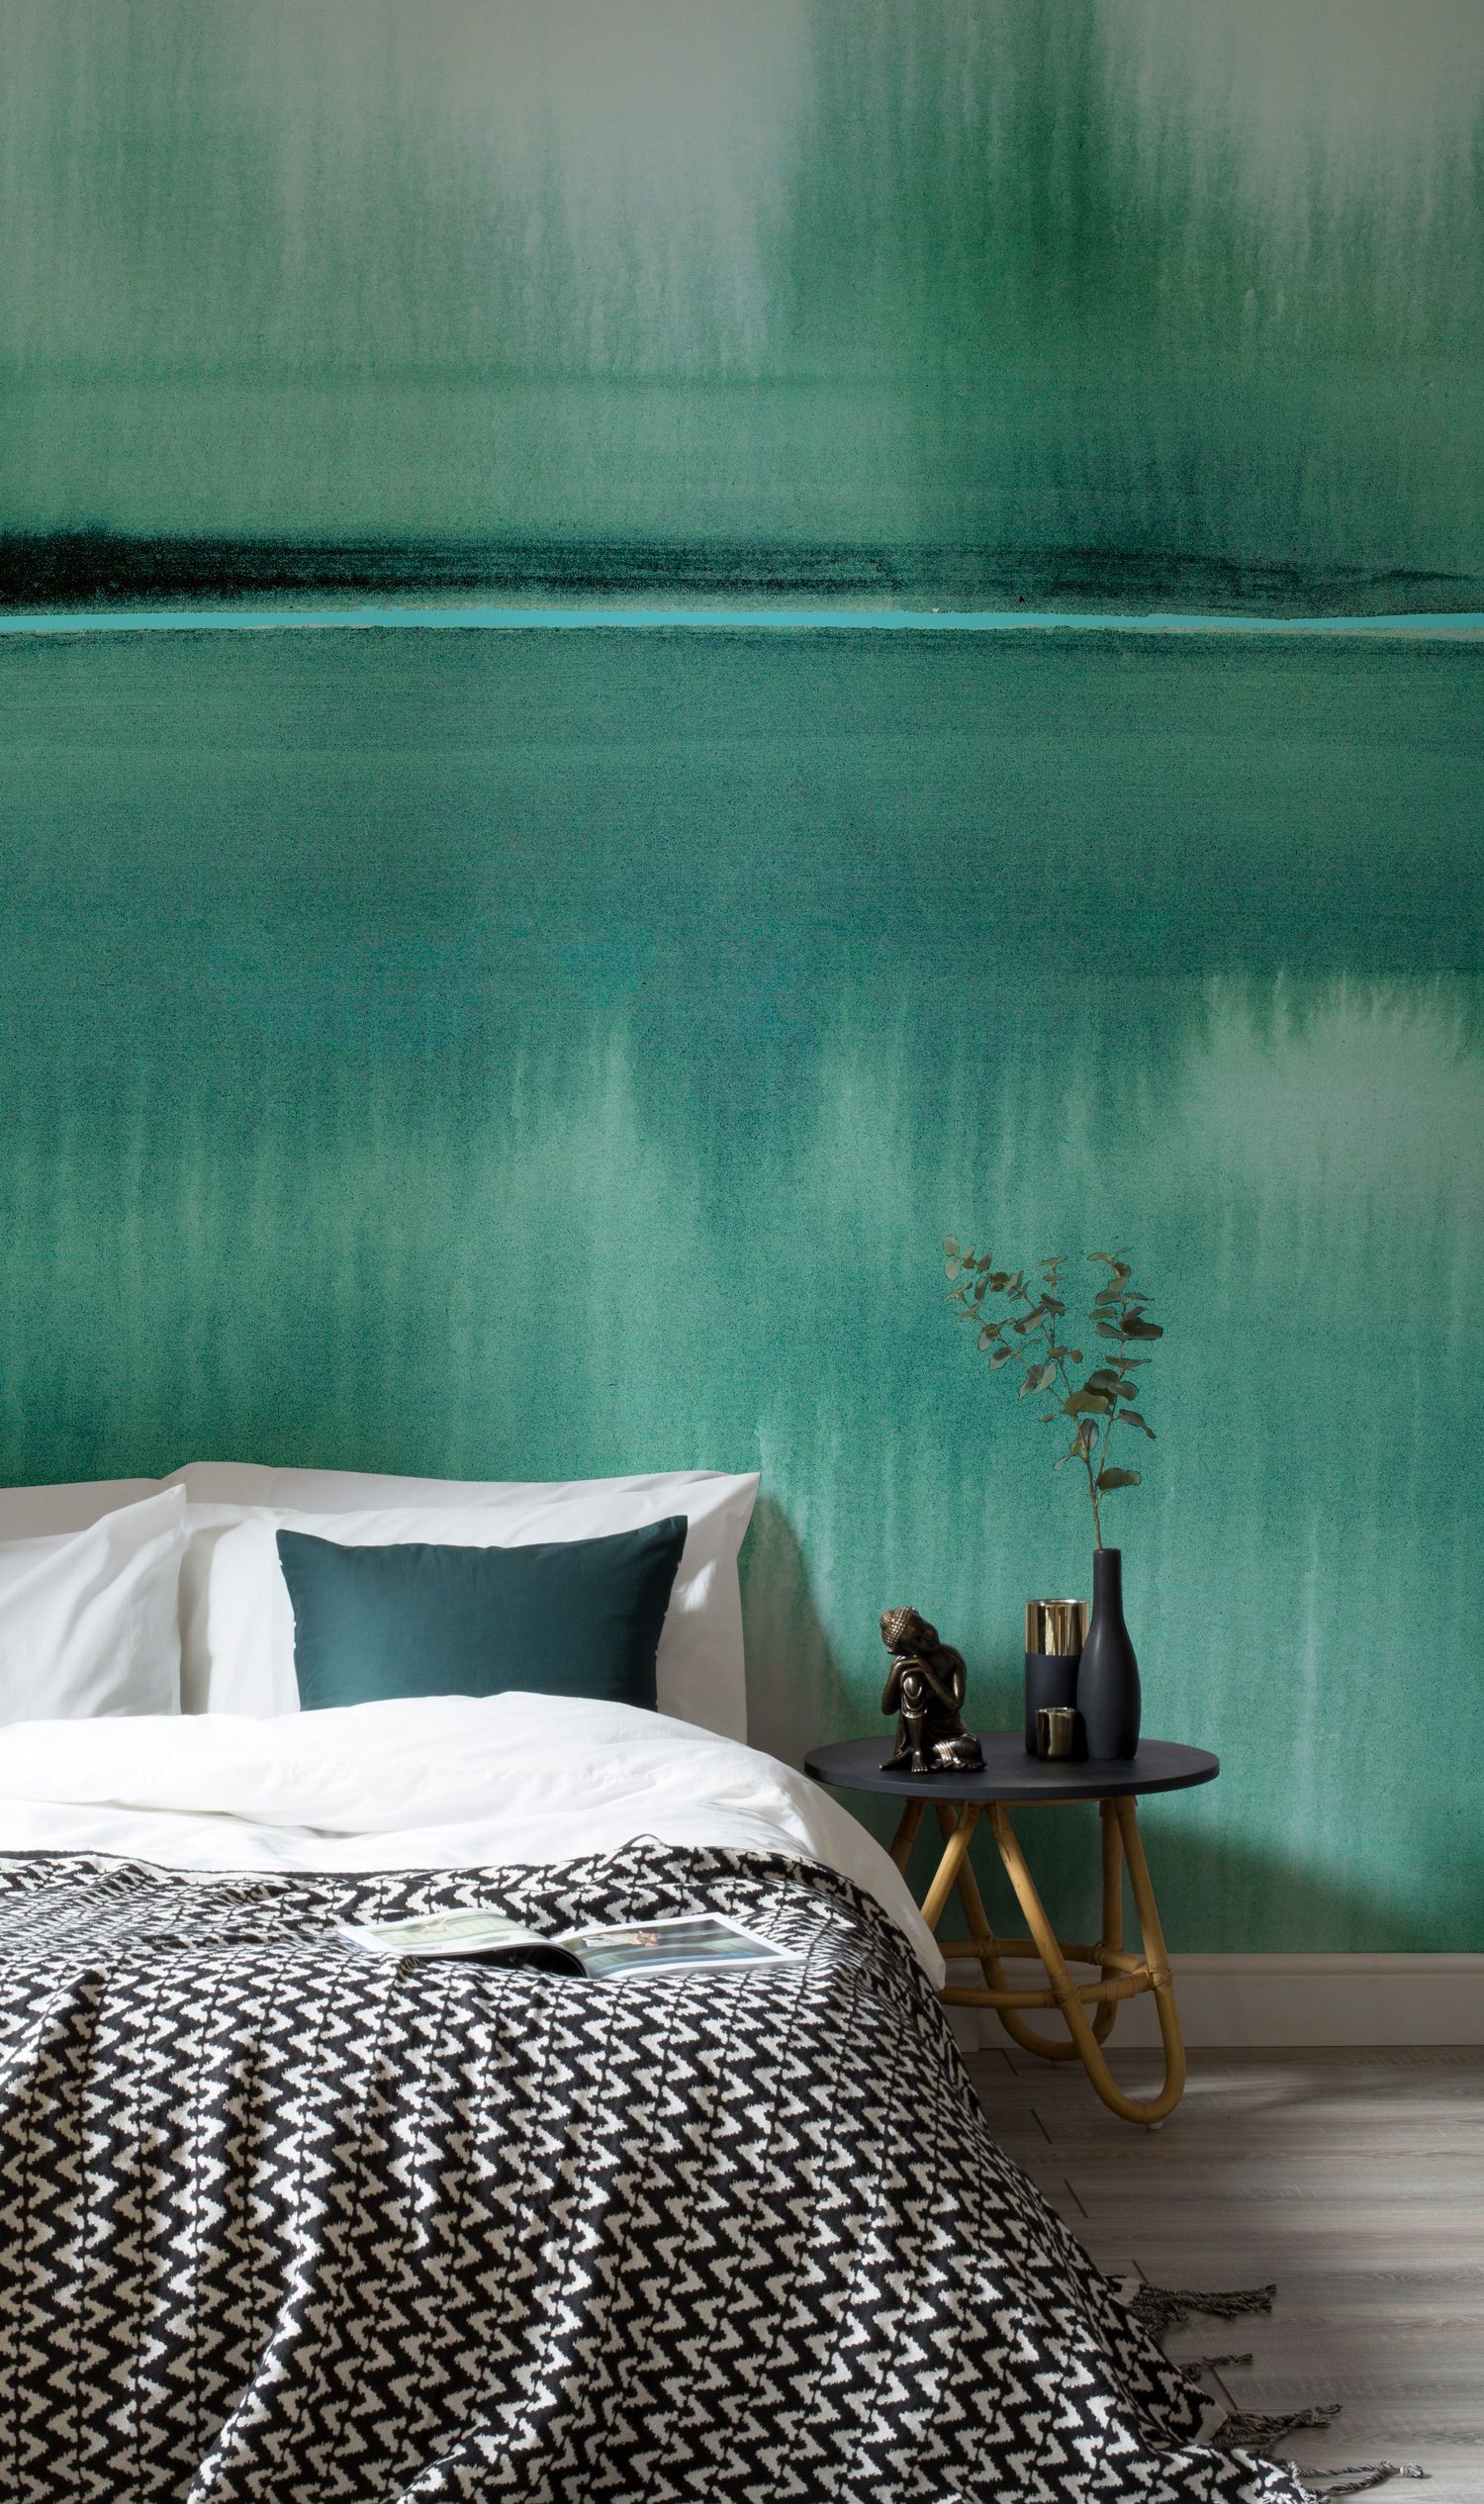 1500x2531 This watercolour wallpaper mural is oozing with deep emerald green hues and  depicts a peaceful still lake. It's perfect for creating a calming  atmosphere in ...